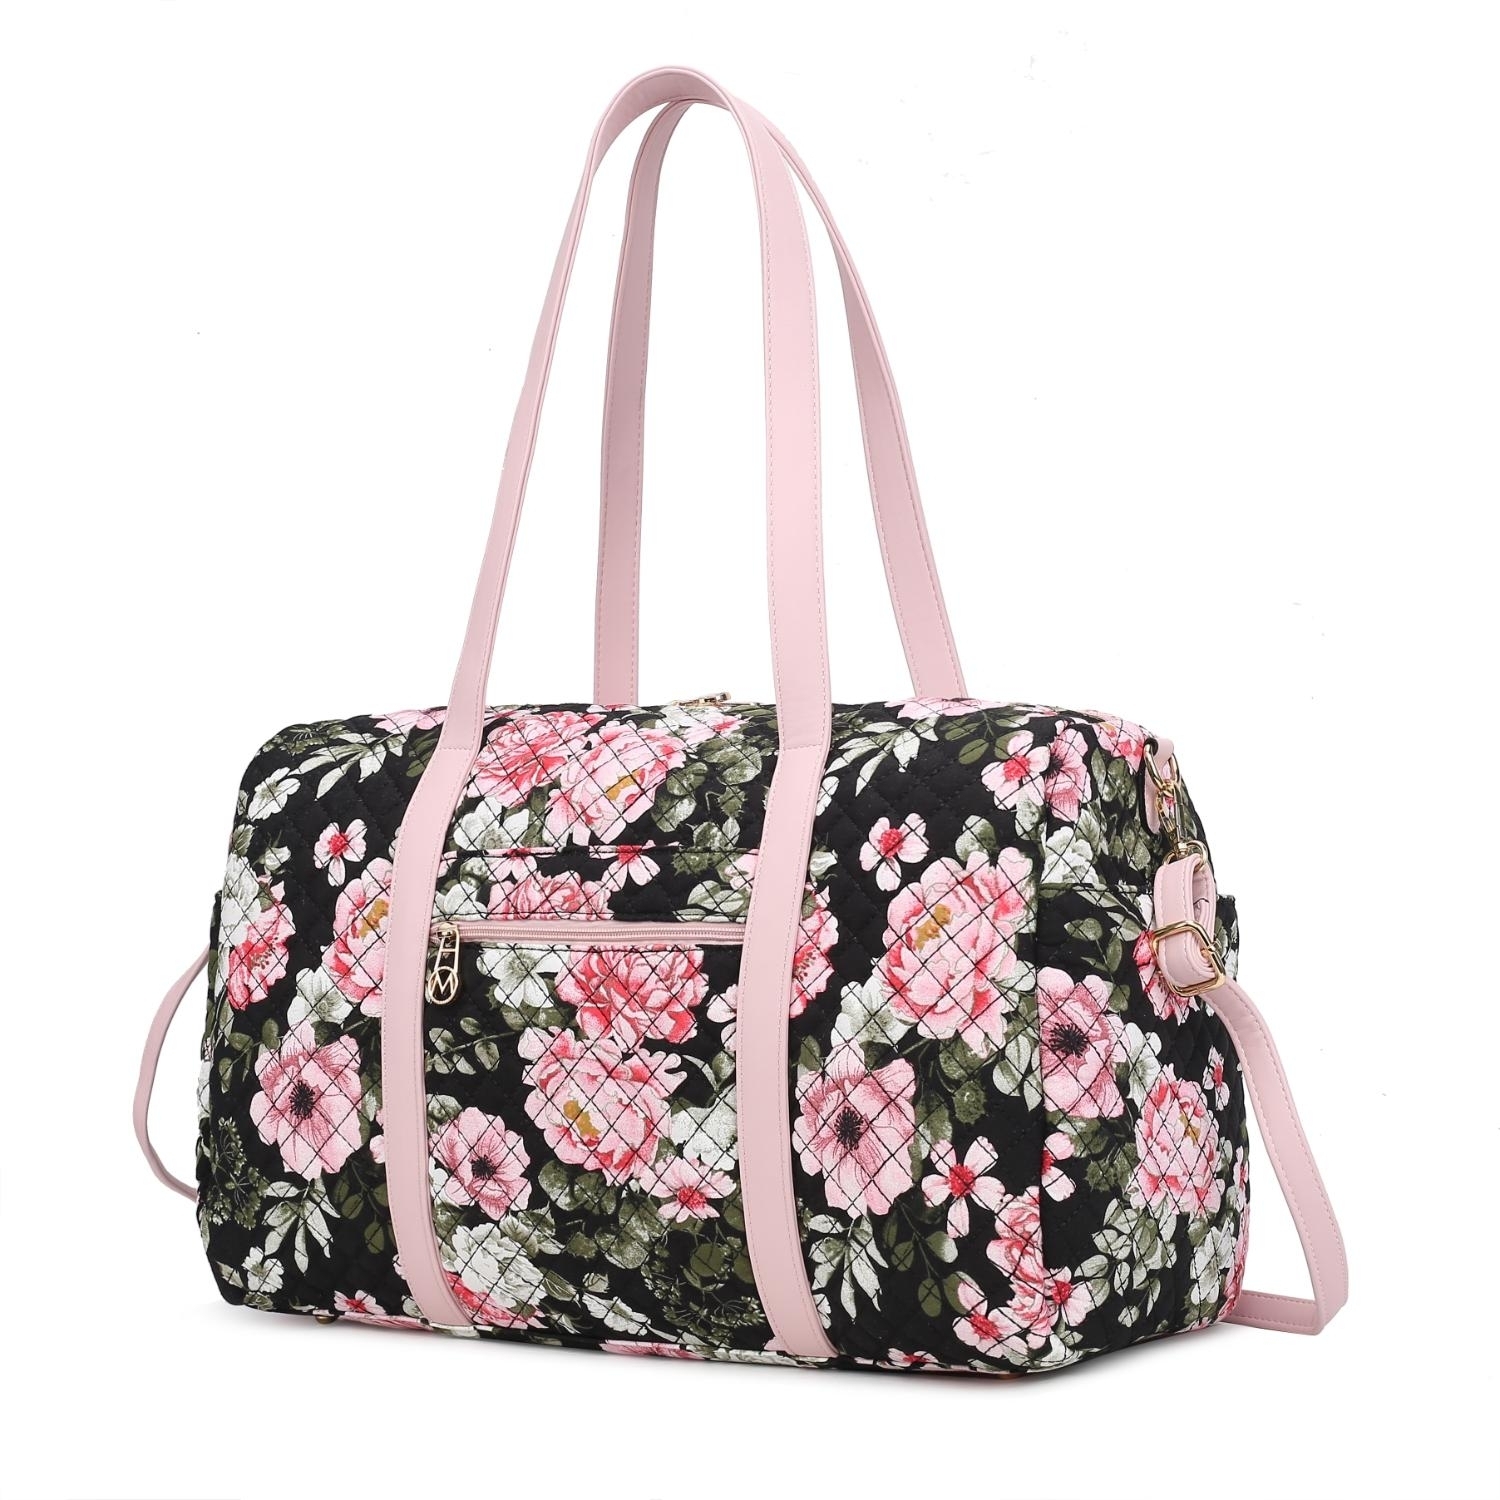 MKF Collection Khelani Quilted Cotton Botanical Pattern Women's Duffle Bag By Mia K - Black